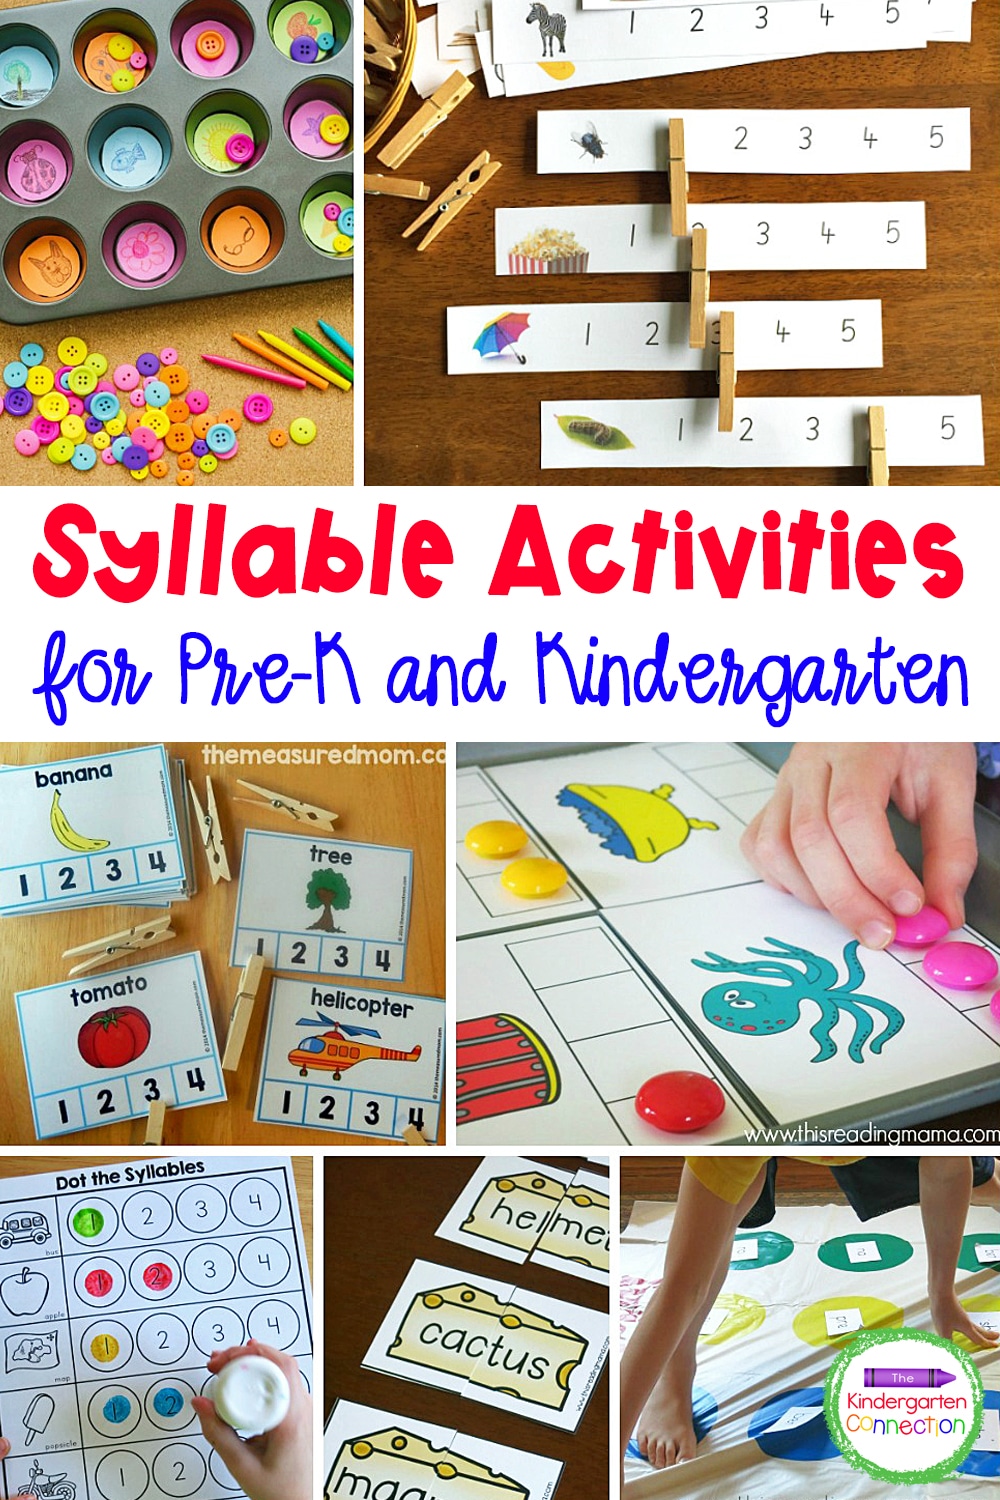 These creative and hands-on syllable activities provide educational value, but also tons of fun for early learners!